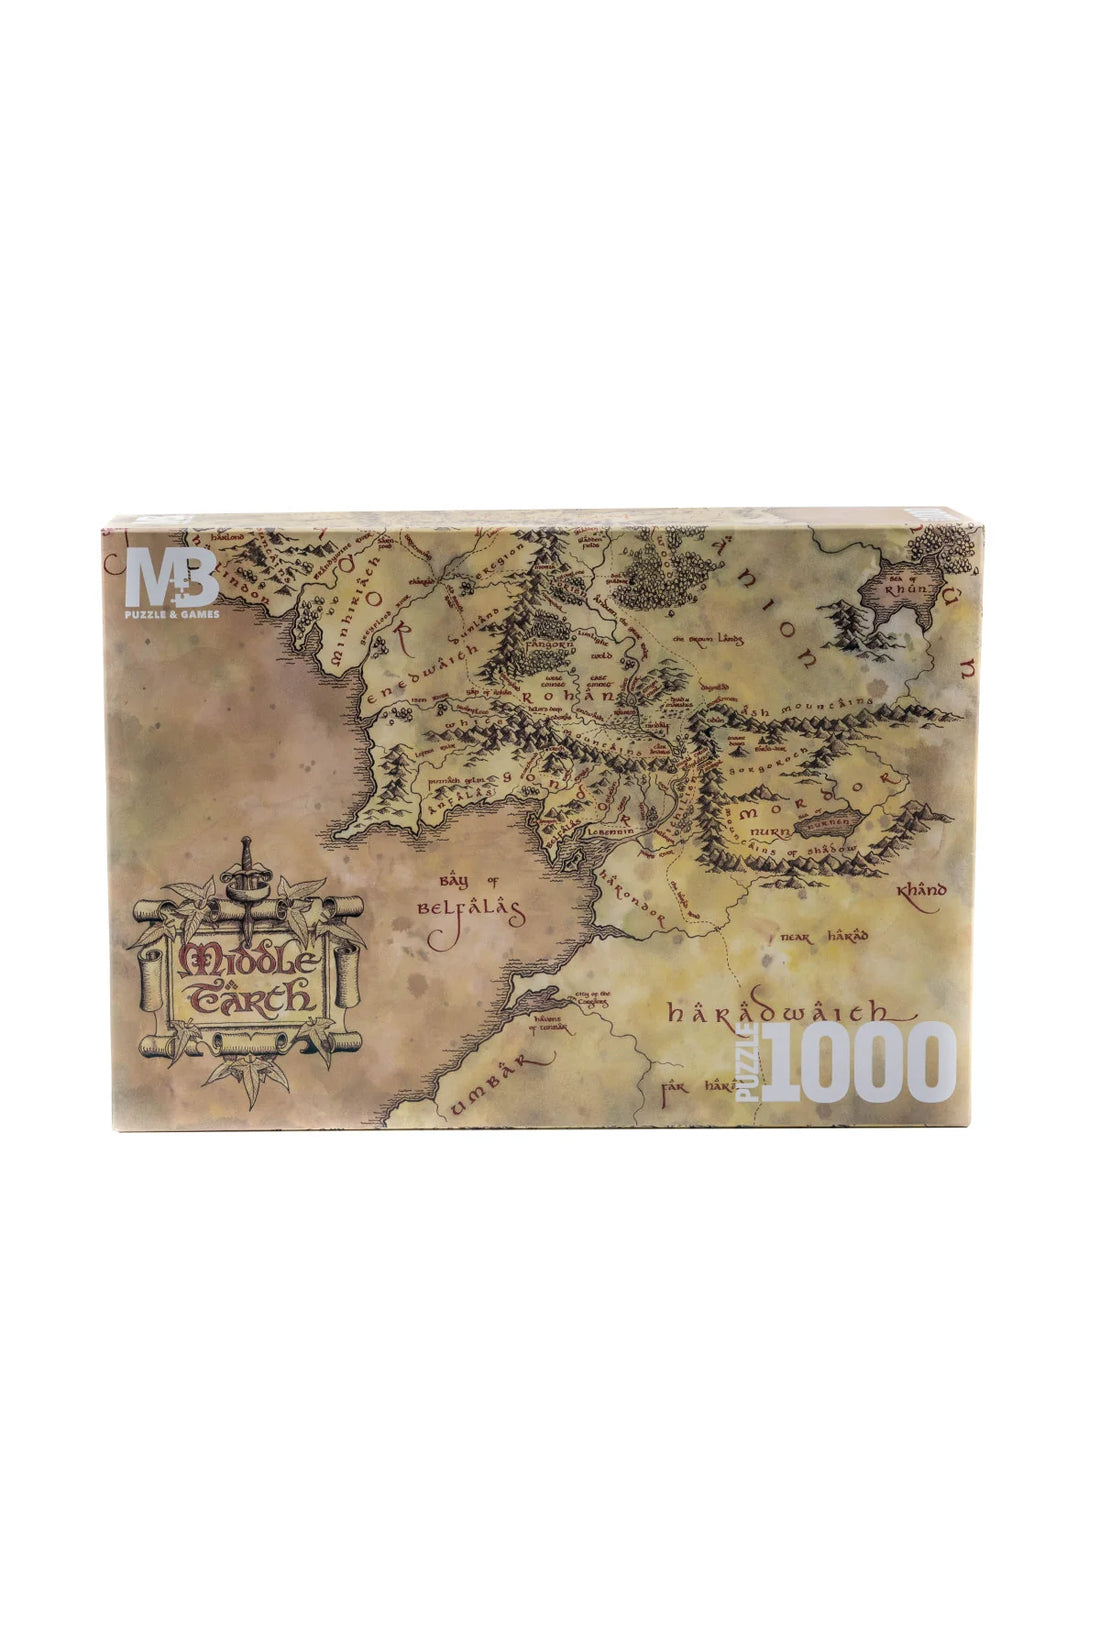 The Lord of the Rings Middle Earth Map 1000 Parça Puzzle LOTR